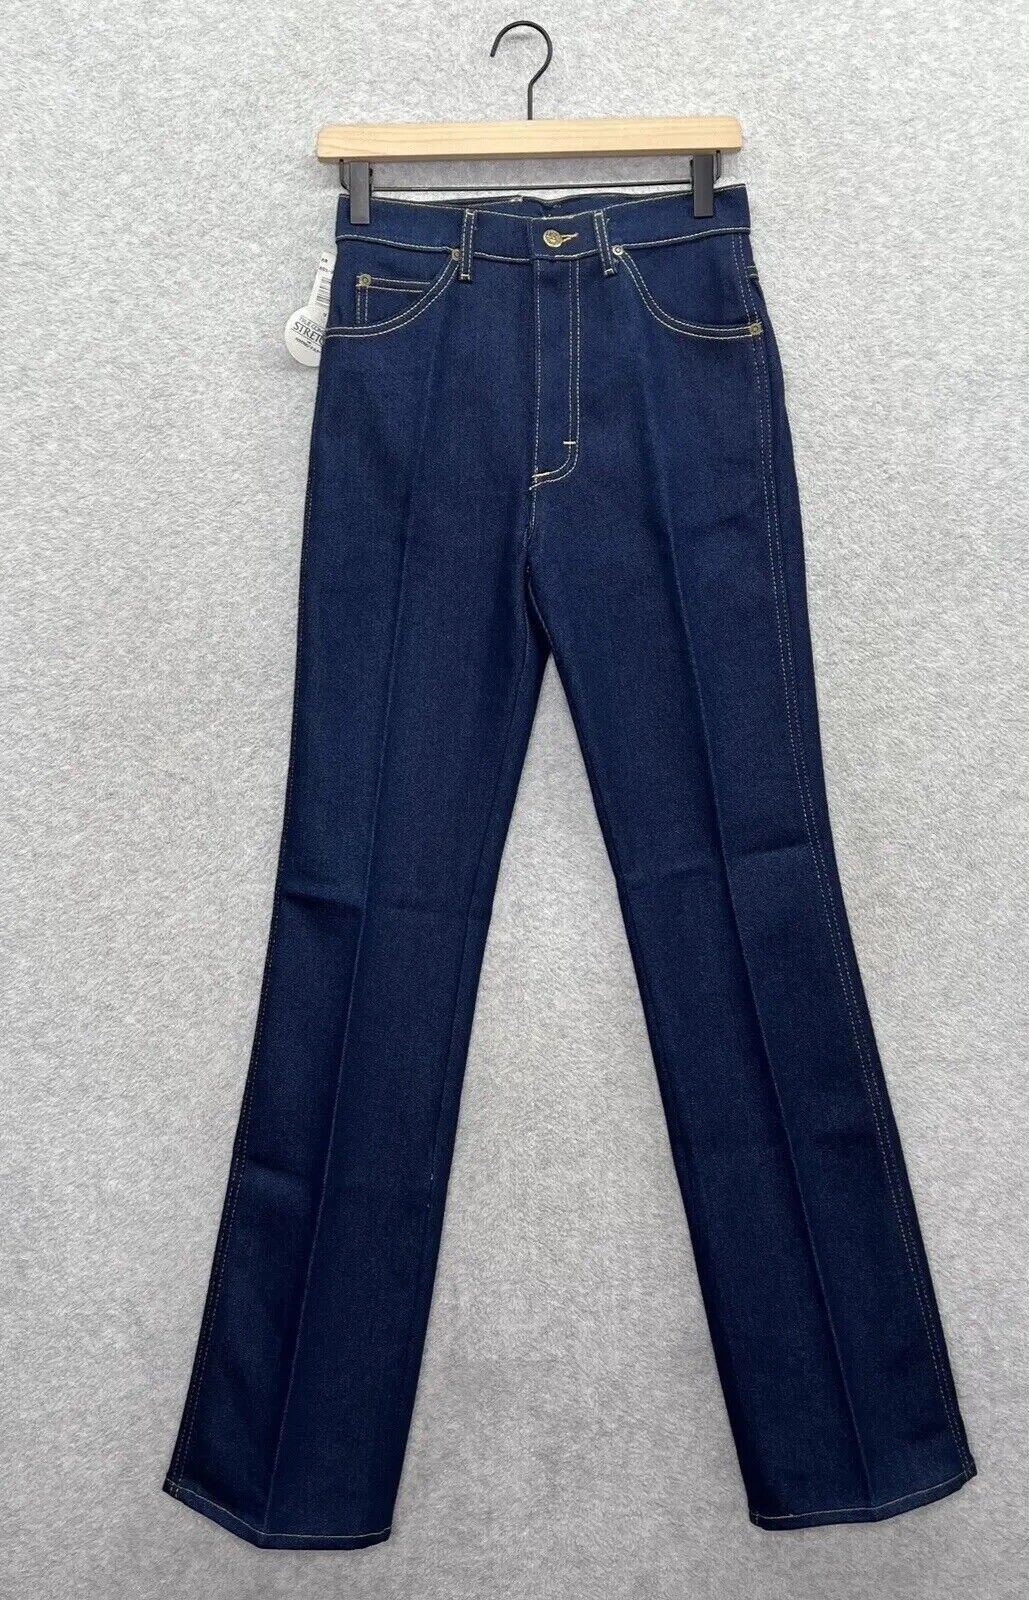 Vintage Lee Jeans Mens 29x36 Blue Boot Cut Riders Western Cowboy Made USA NEW